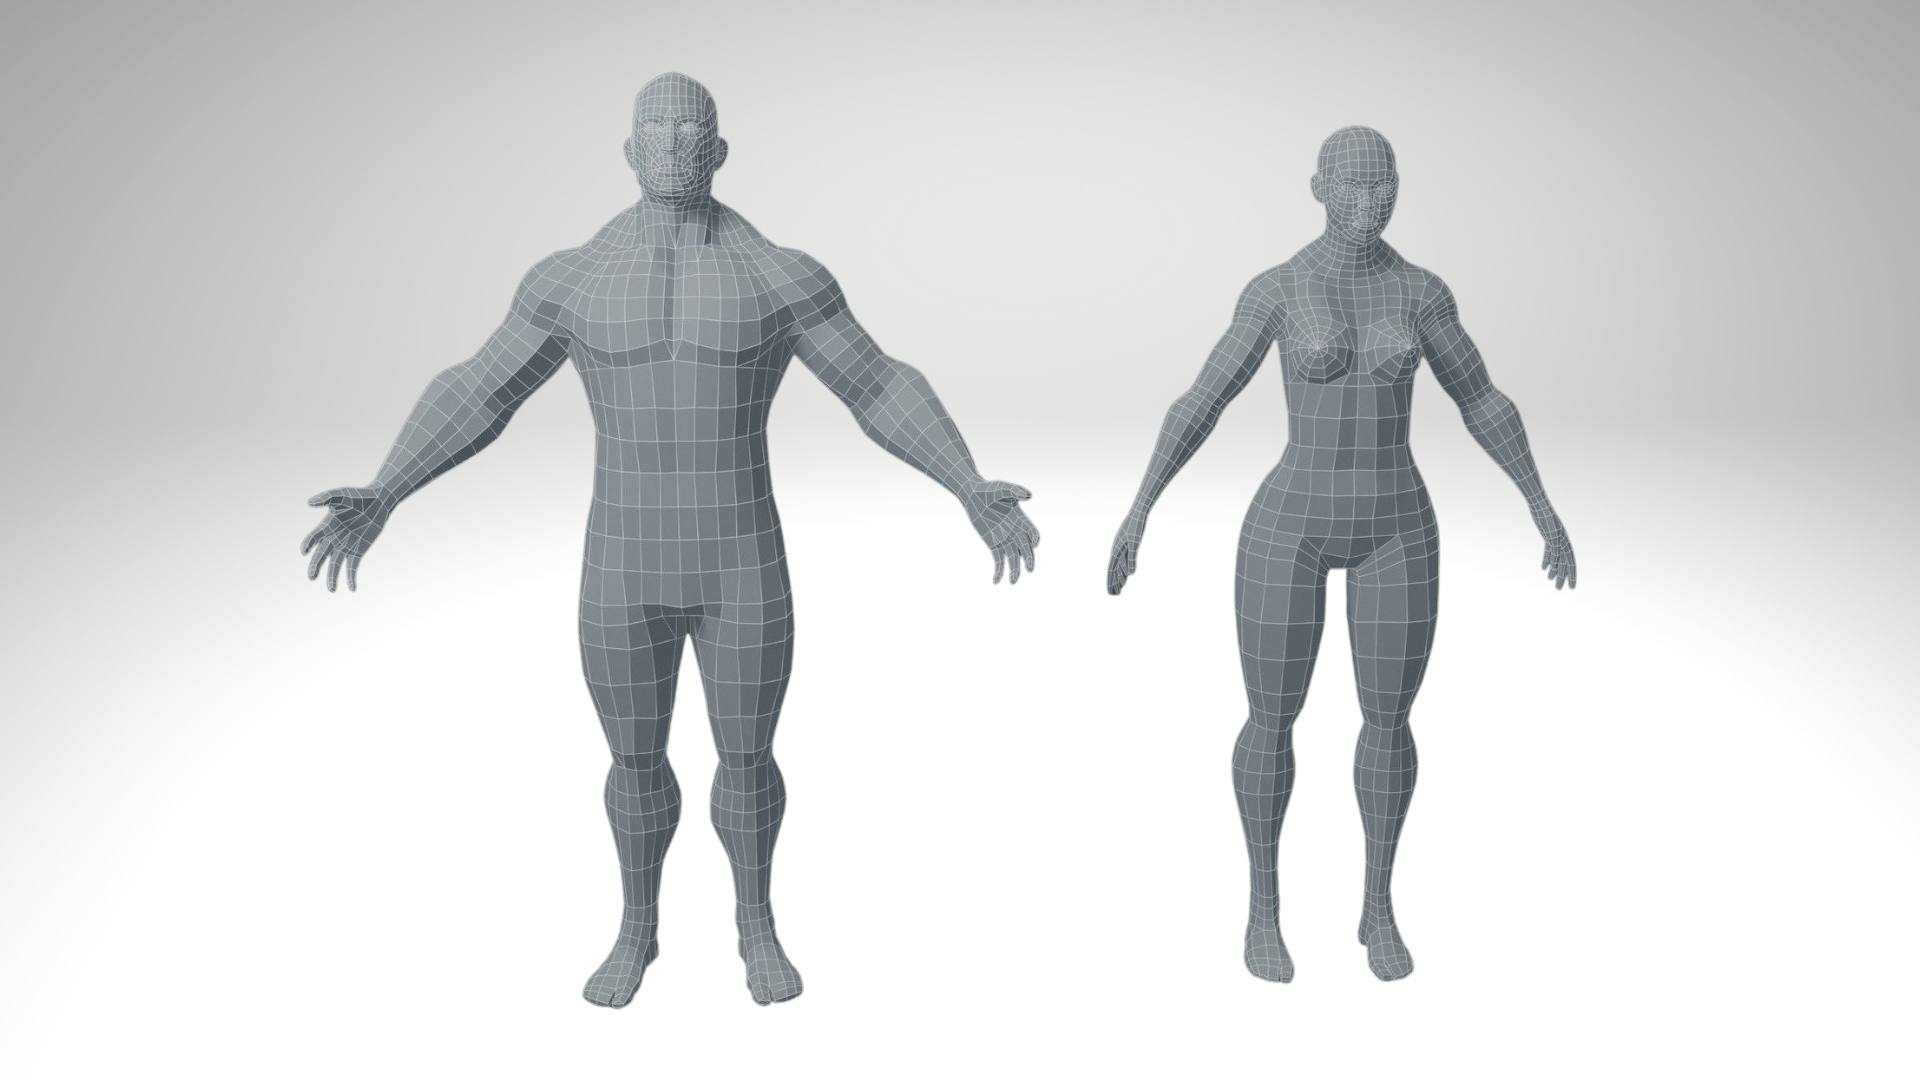 Creation of an Animated 3D human model